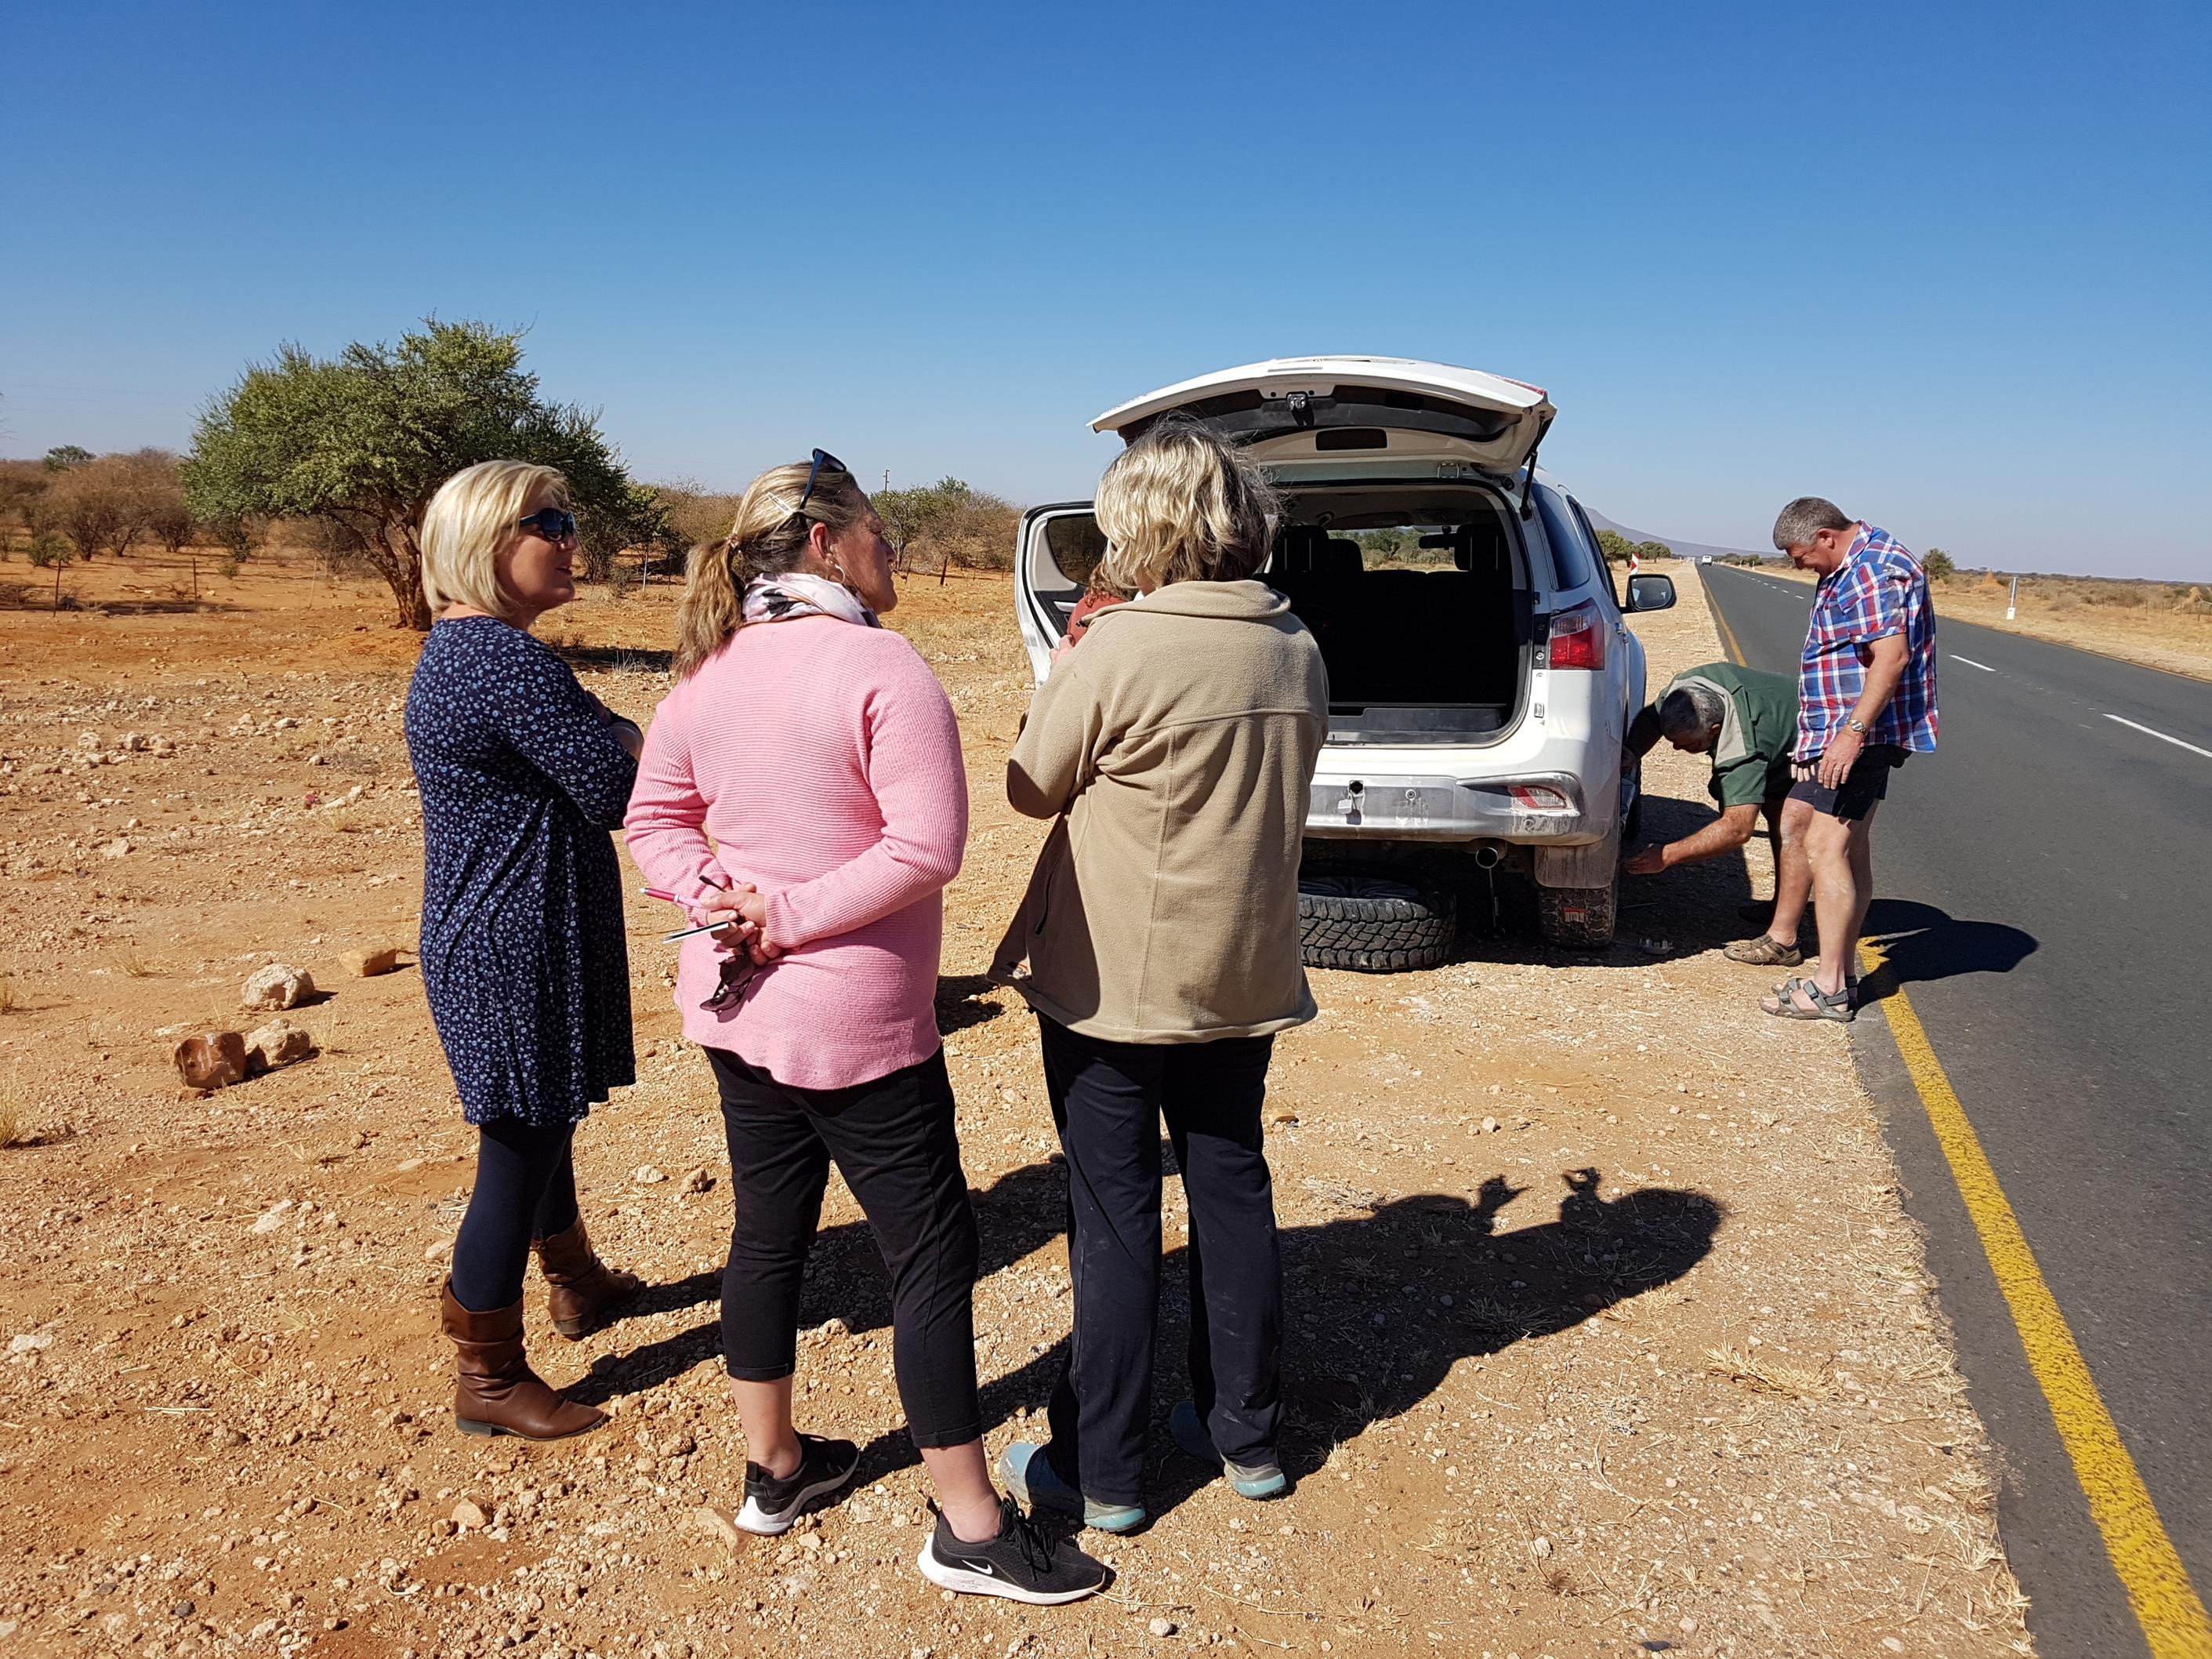 Better to get a flat tyre on the way to the airport than in Etosha with the lions. We were grateful for help from passersby